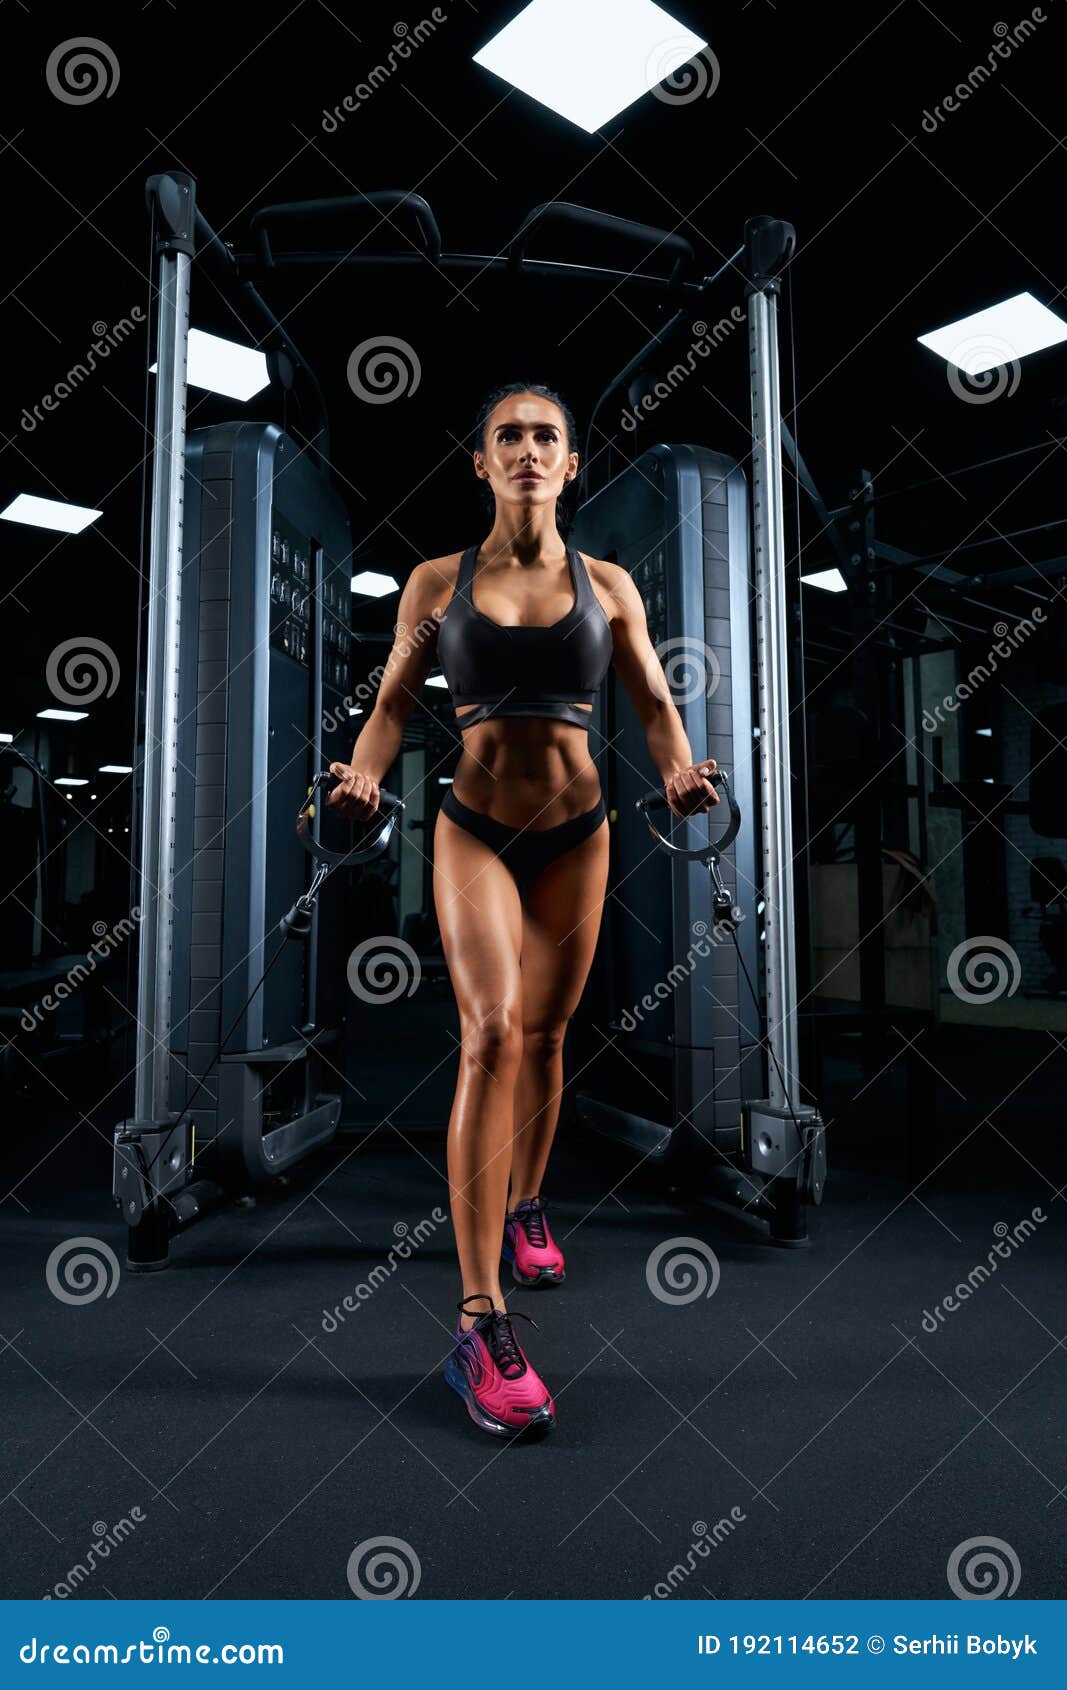 Muscle lady in lingerie 1 739 Muscular Female Underwear Photos Free Royalty Free Stock Photos From Dreamstime